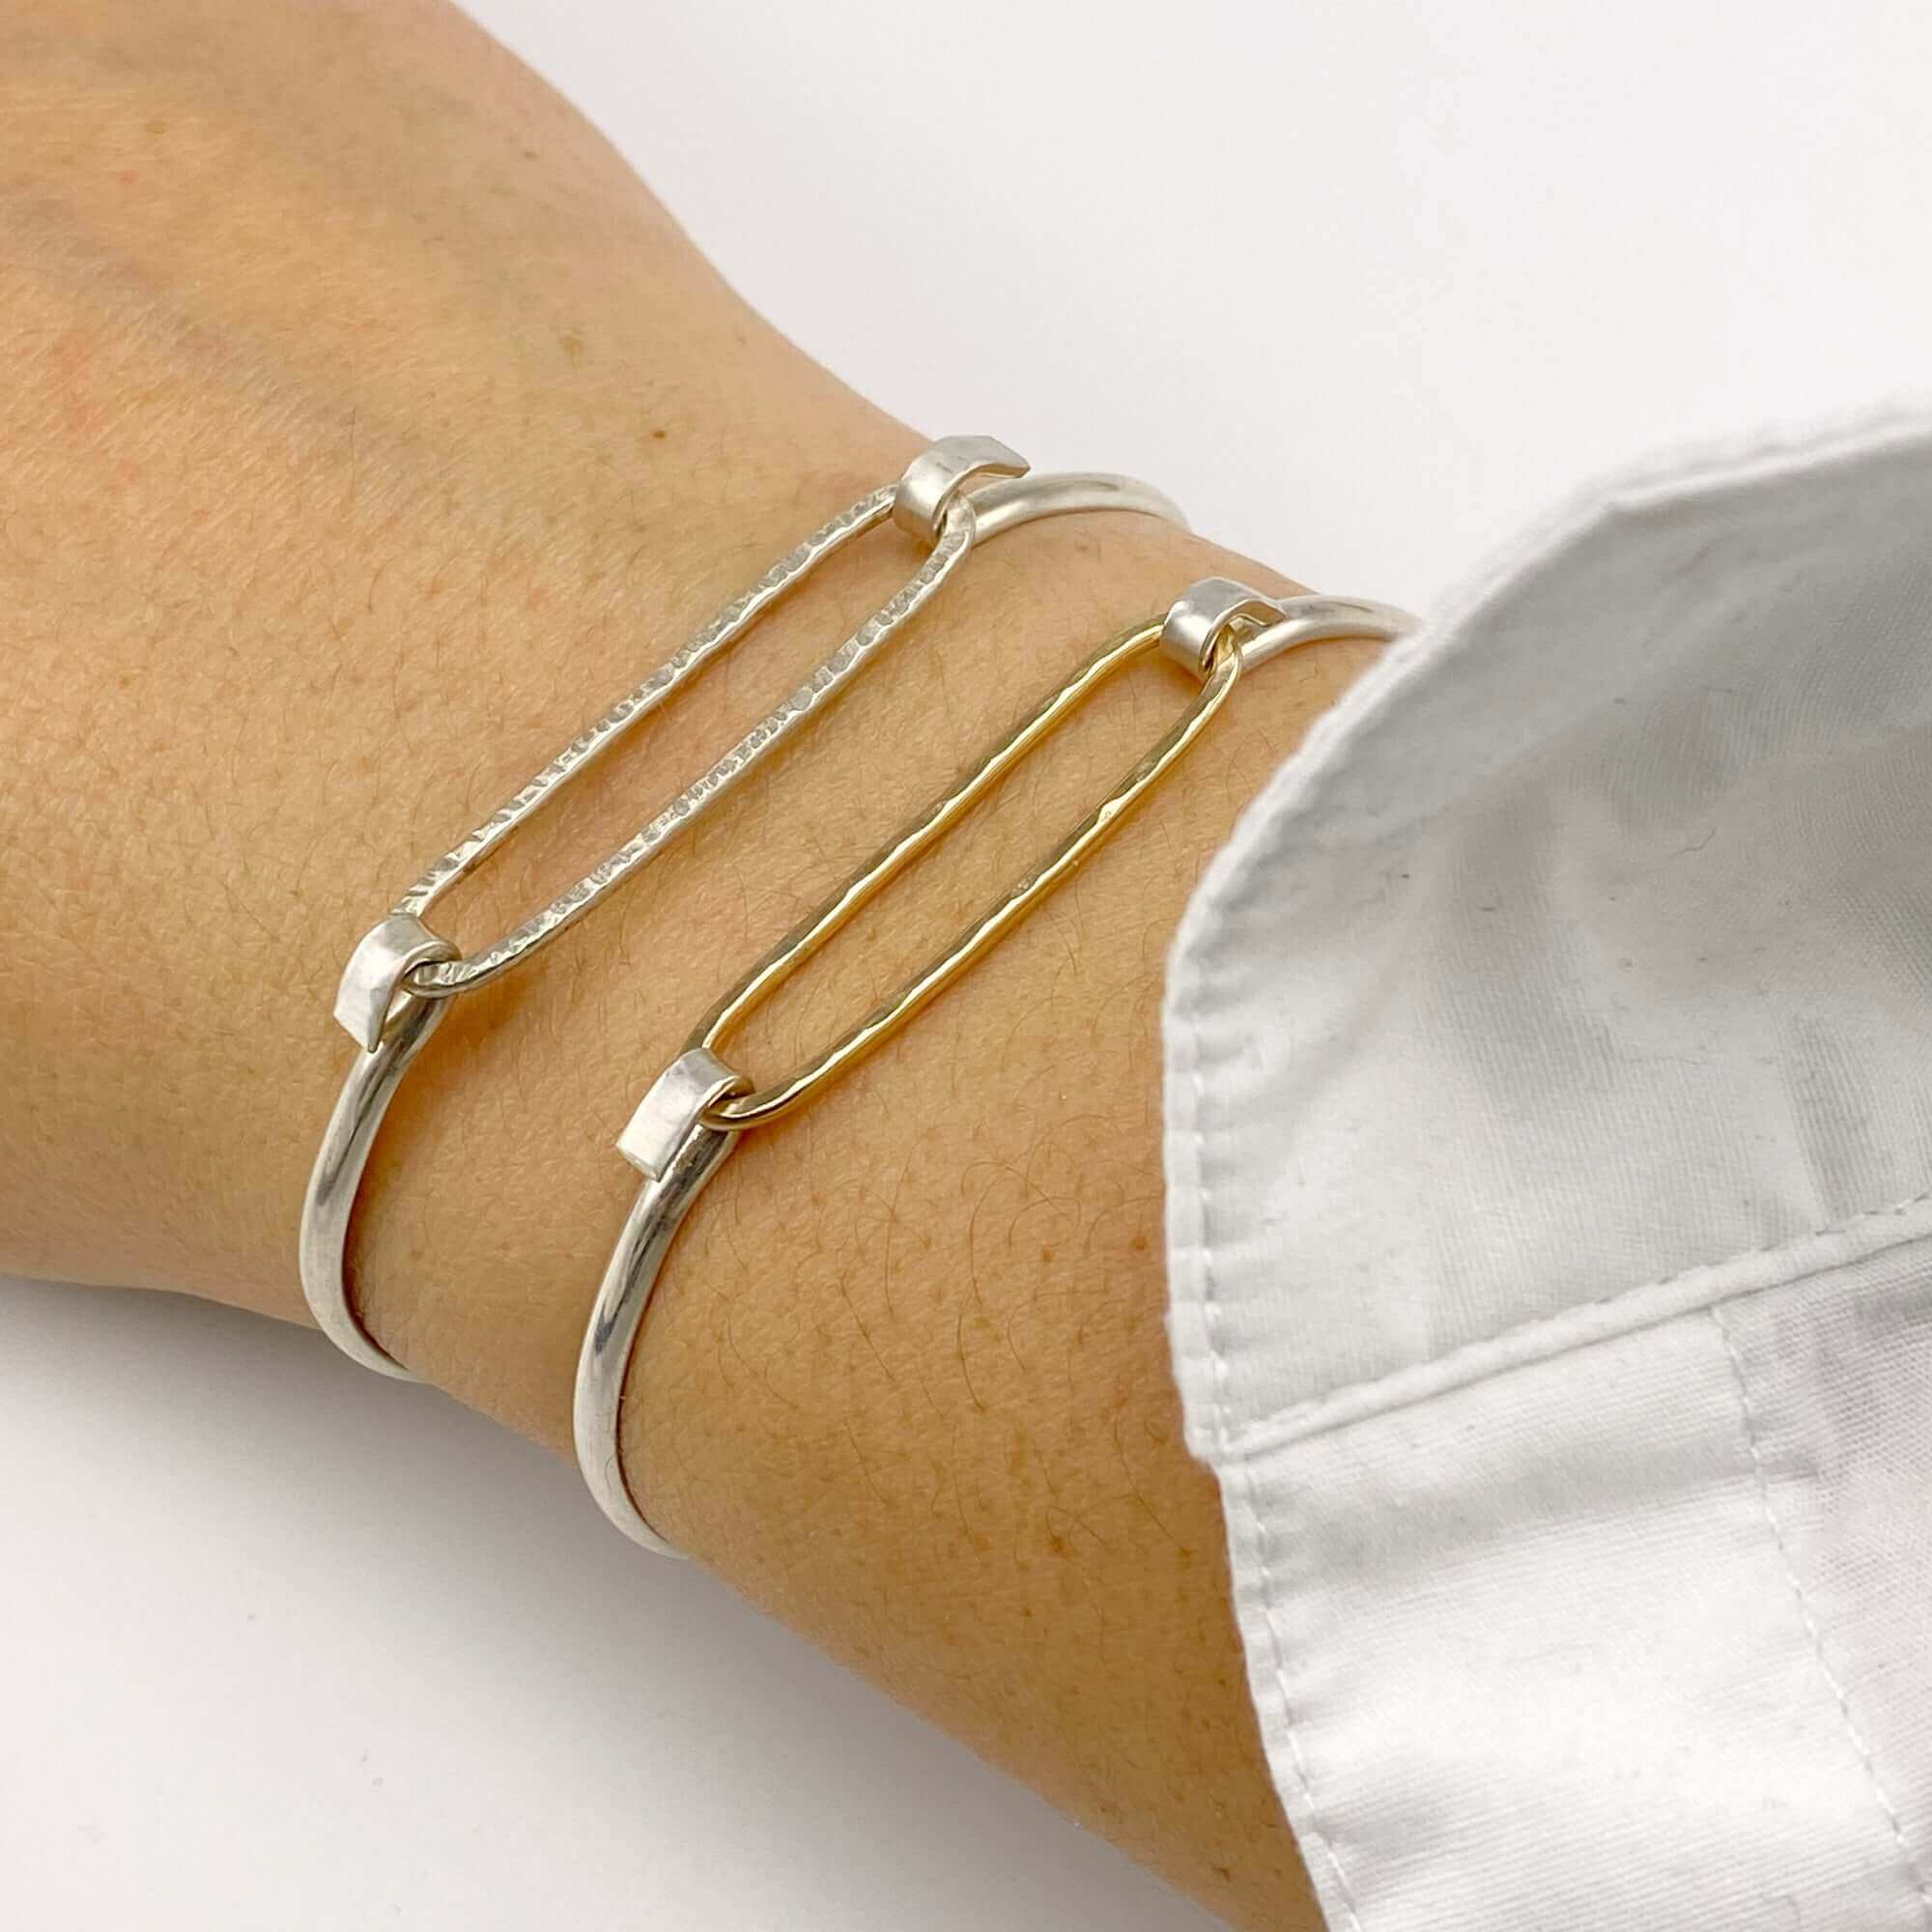 Learn Which Hand To Wear a Citrine Bracelet in This Guide